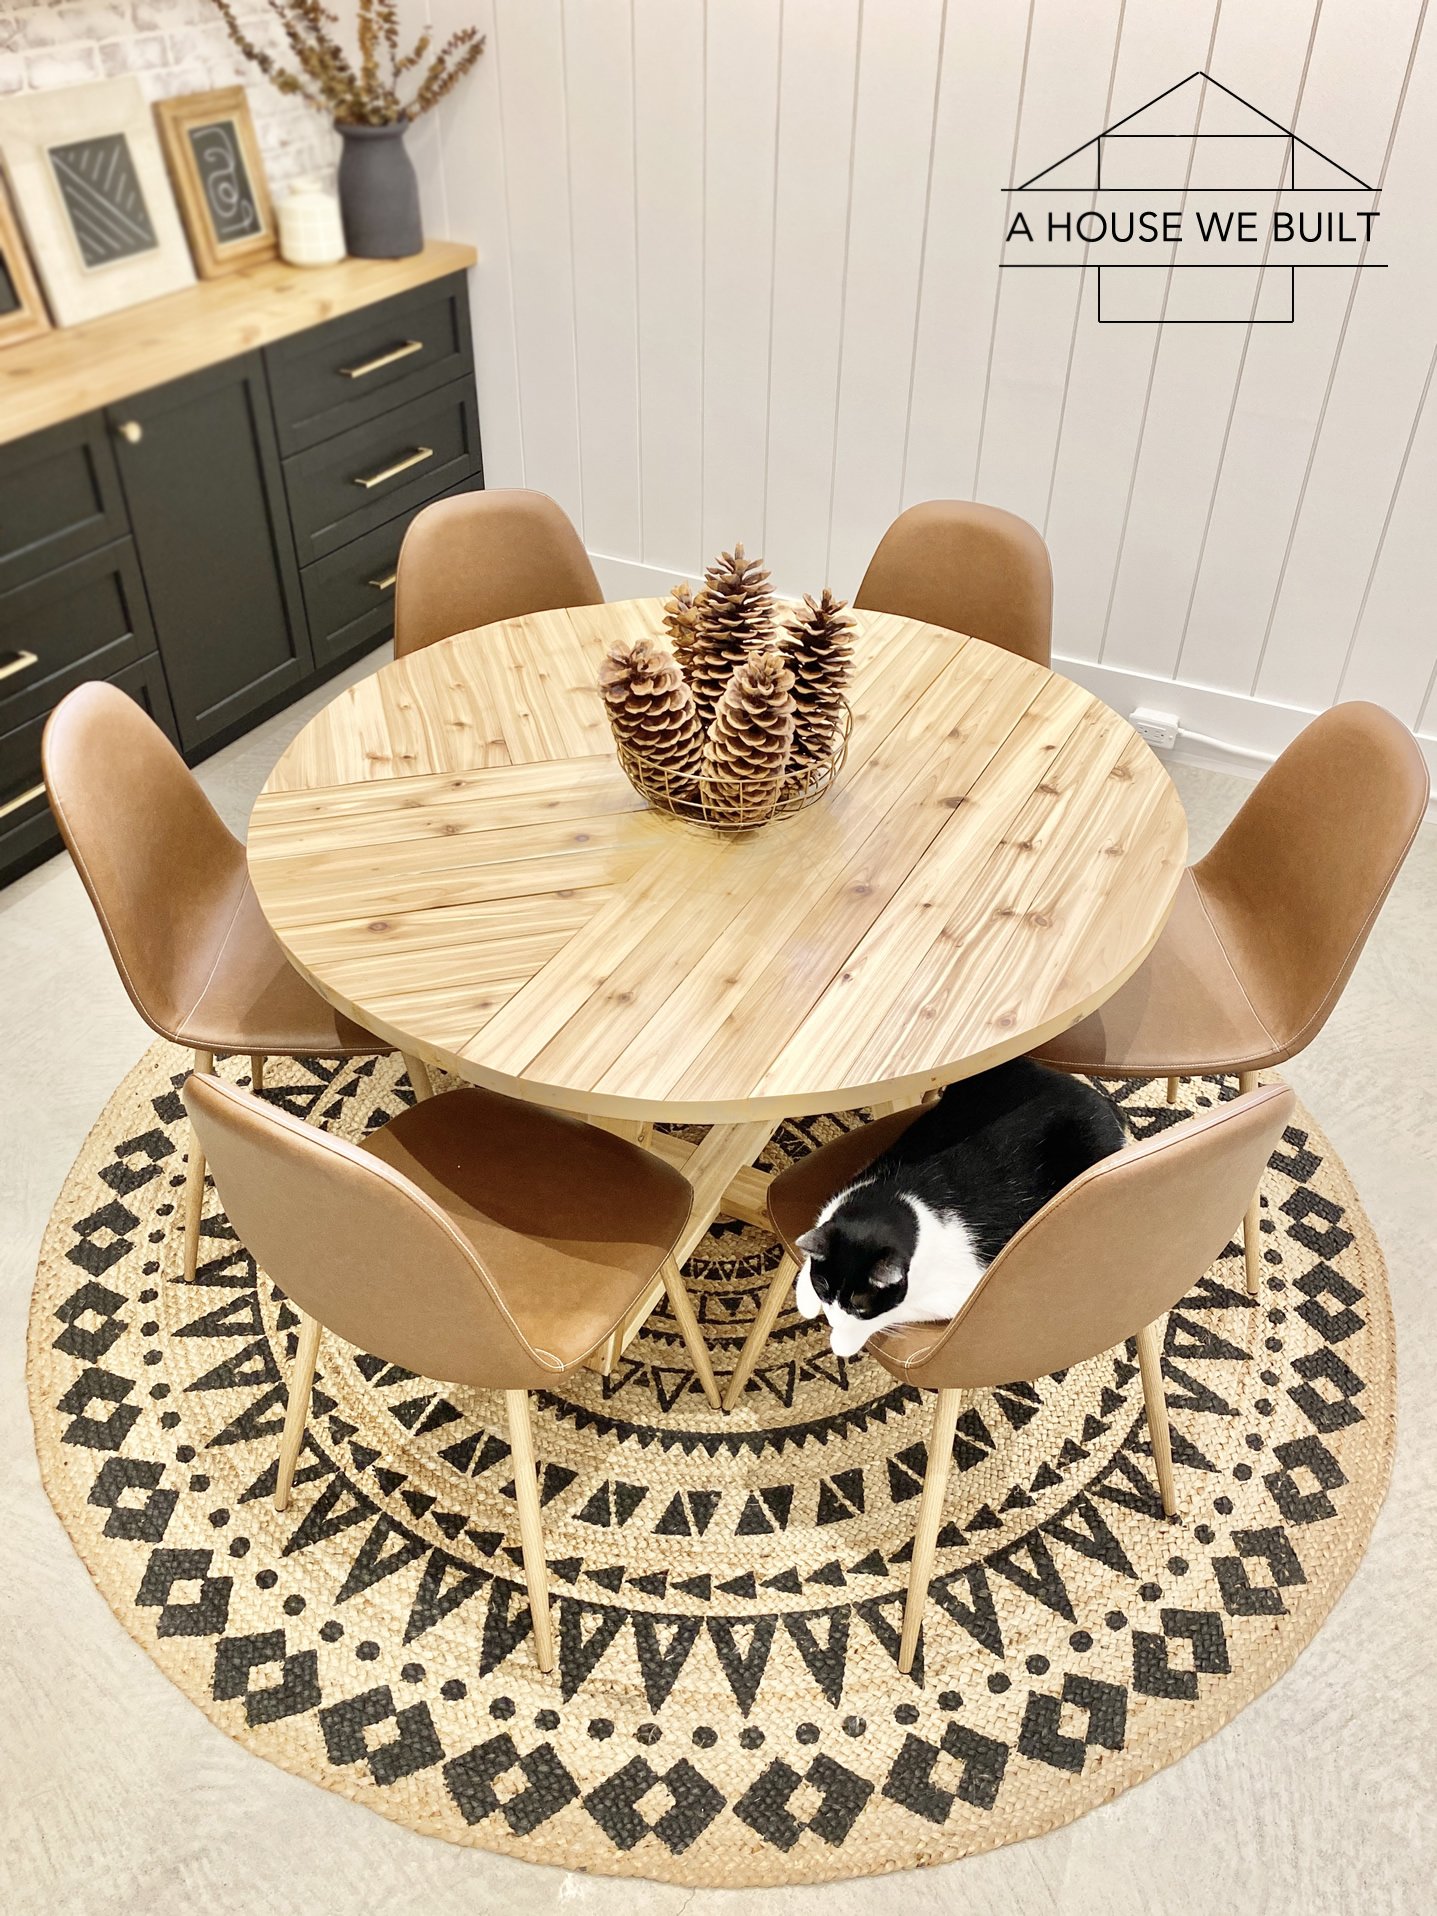 How To Build A Round Table, Making Round Dining Table